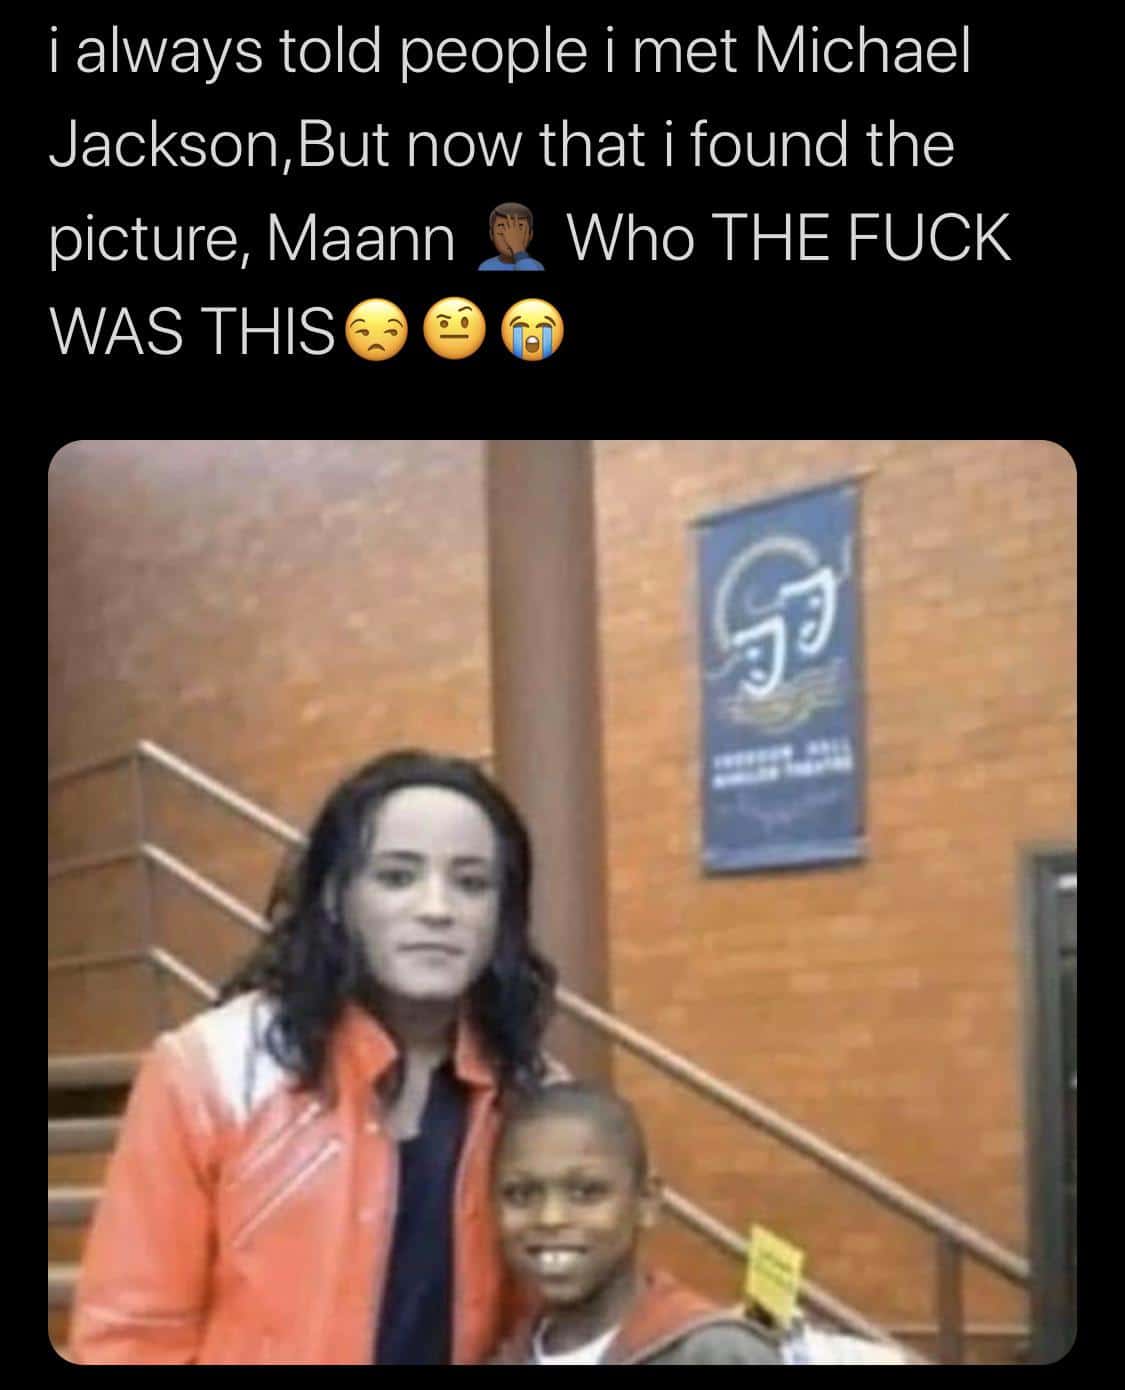 Hold up, Wheel, Spin, HolUp, Michael Jackson, TNkvvD Dank Memes Hold up, Wheel, Spin, HolUp, Michael Jackson, TNkvvD text: i always told people i met Michael Jackson,But now that i found the picture, Maann Who THE FUCK WAS THIS' 